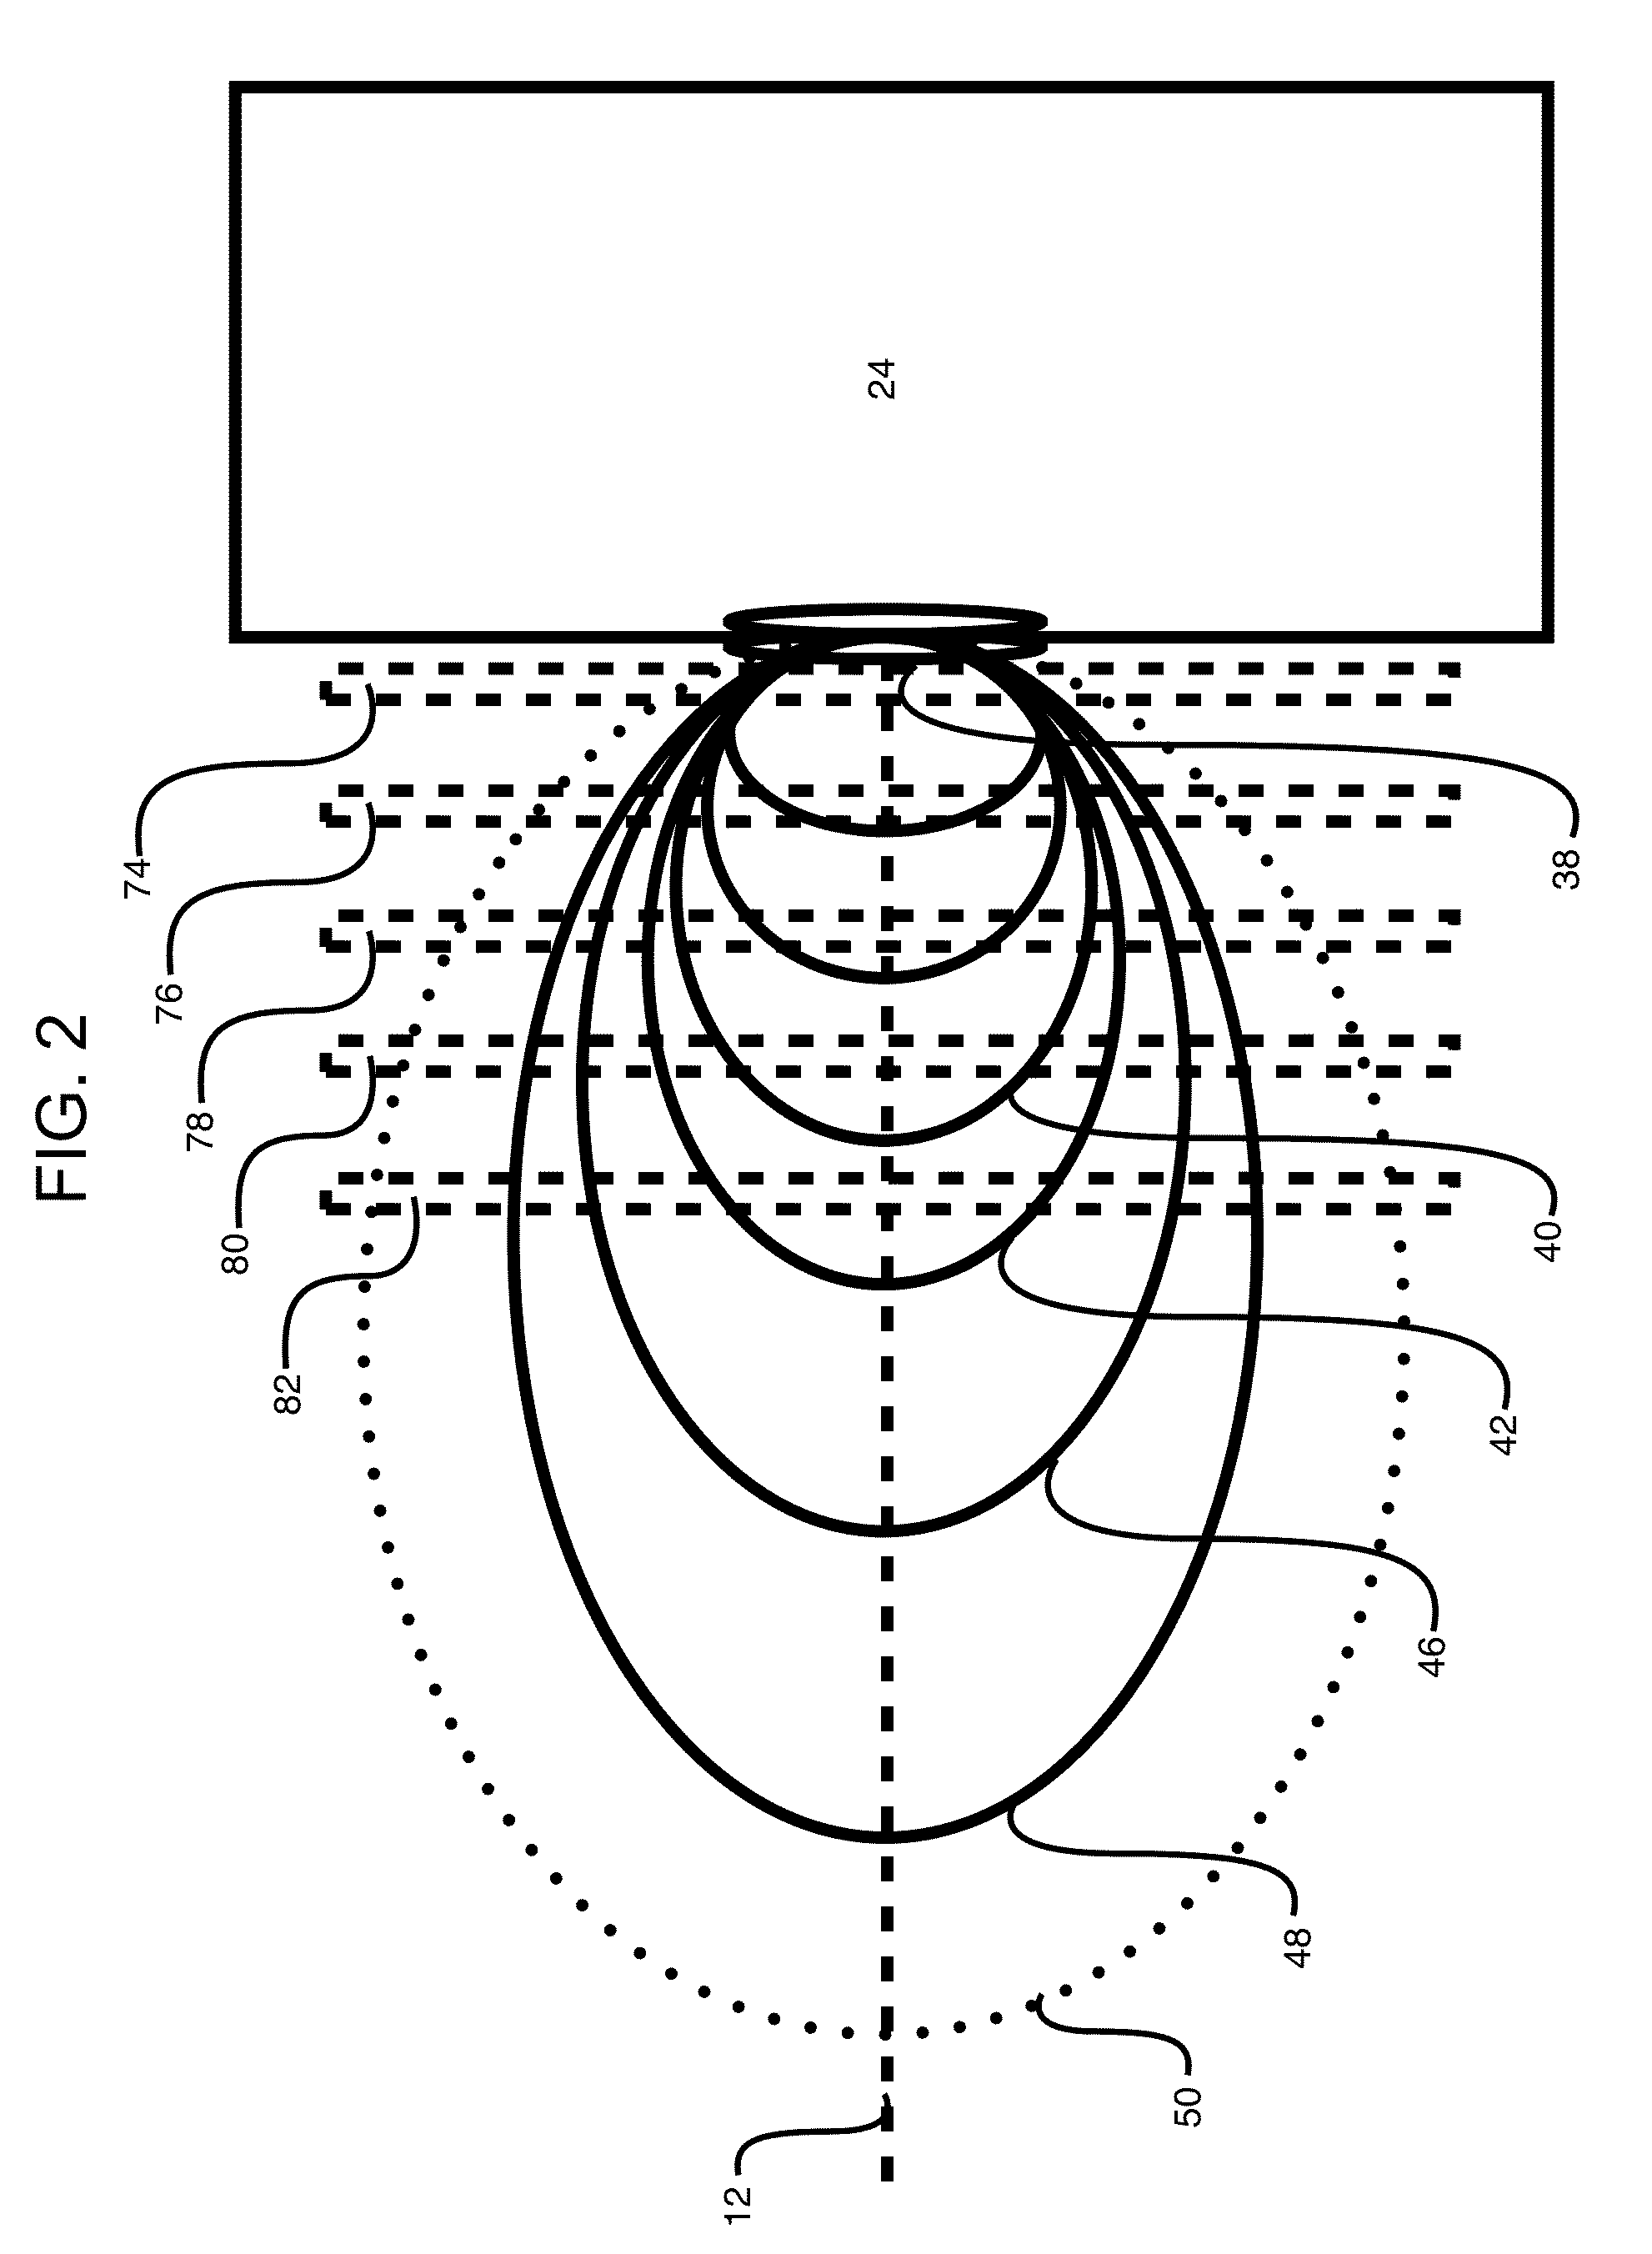 Method and apparatus for production of uniformly sized nanoparticles